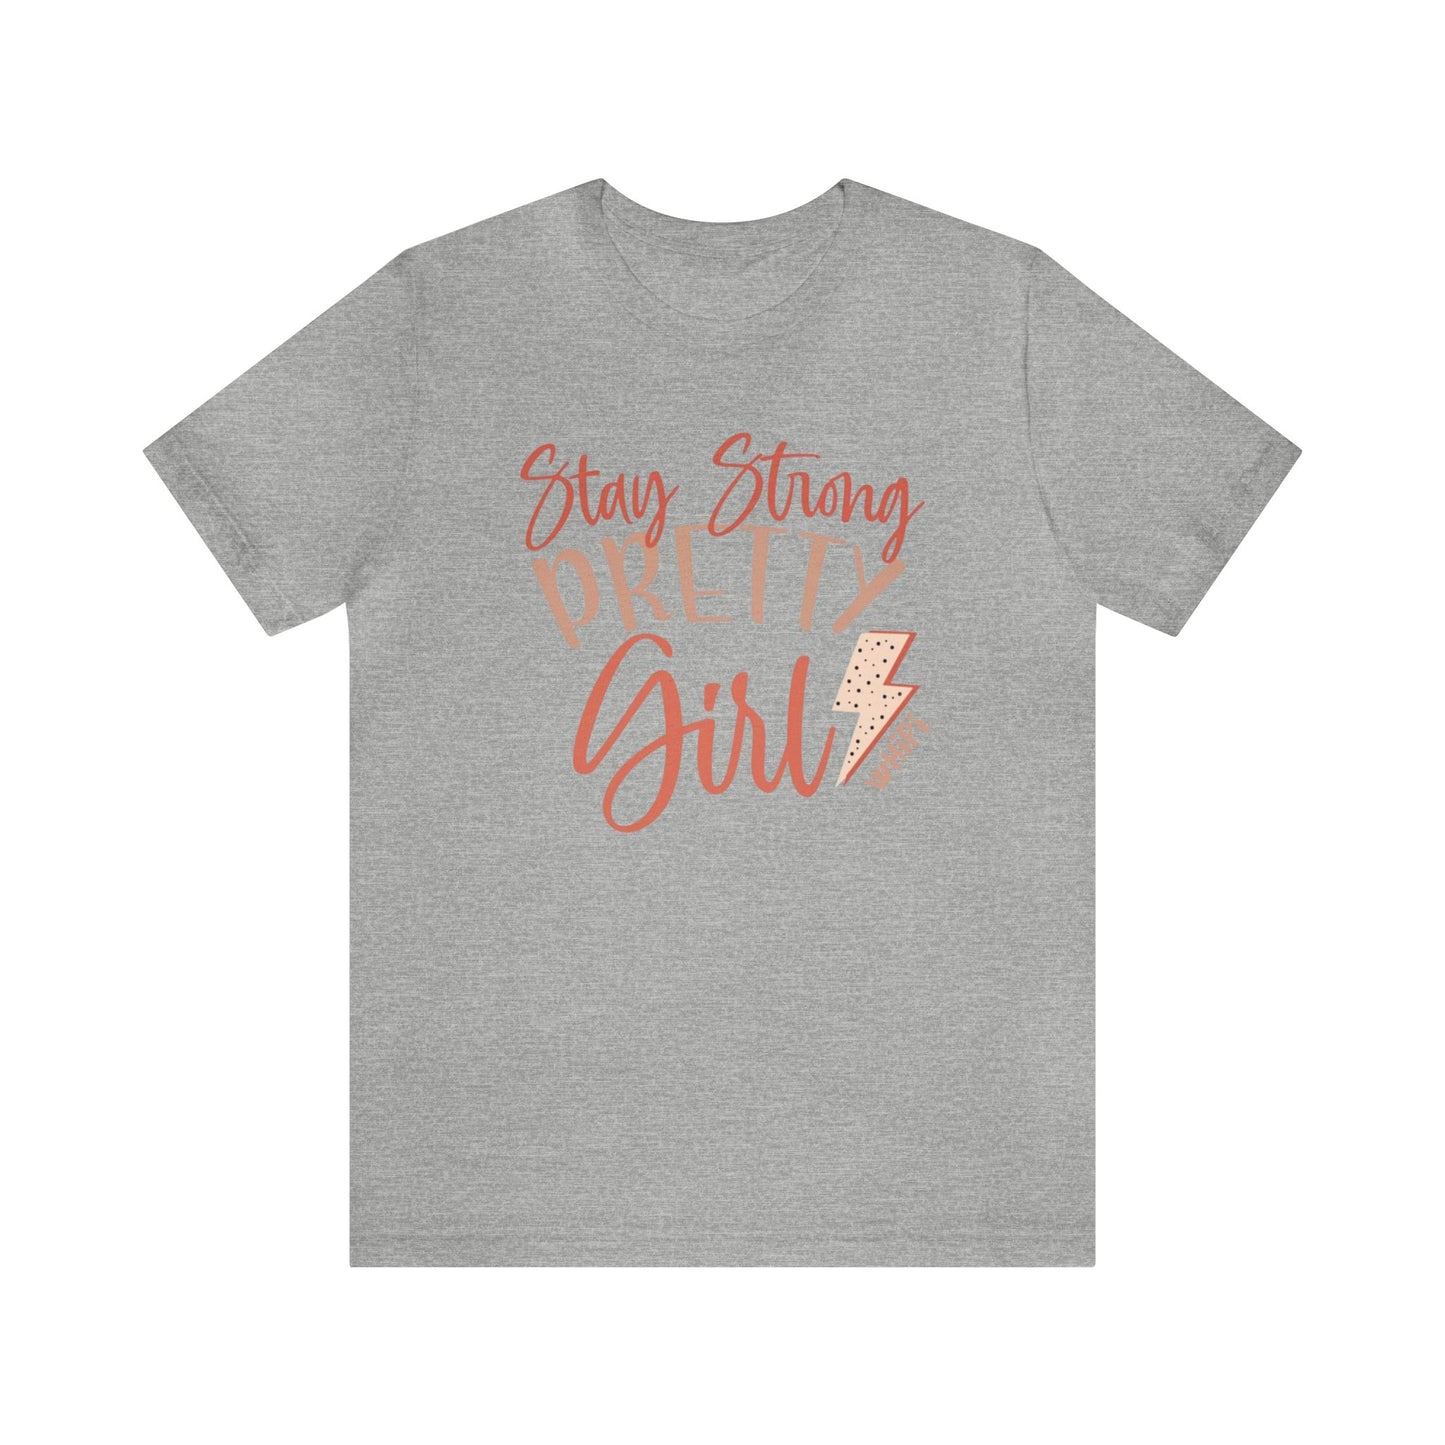 Stay Strong Pretty Girl Tee